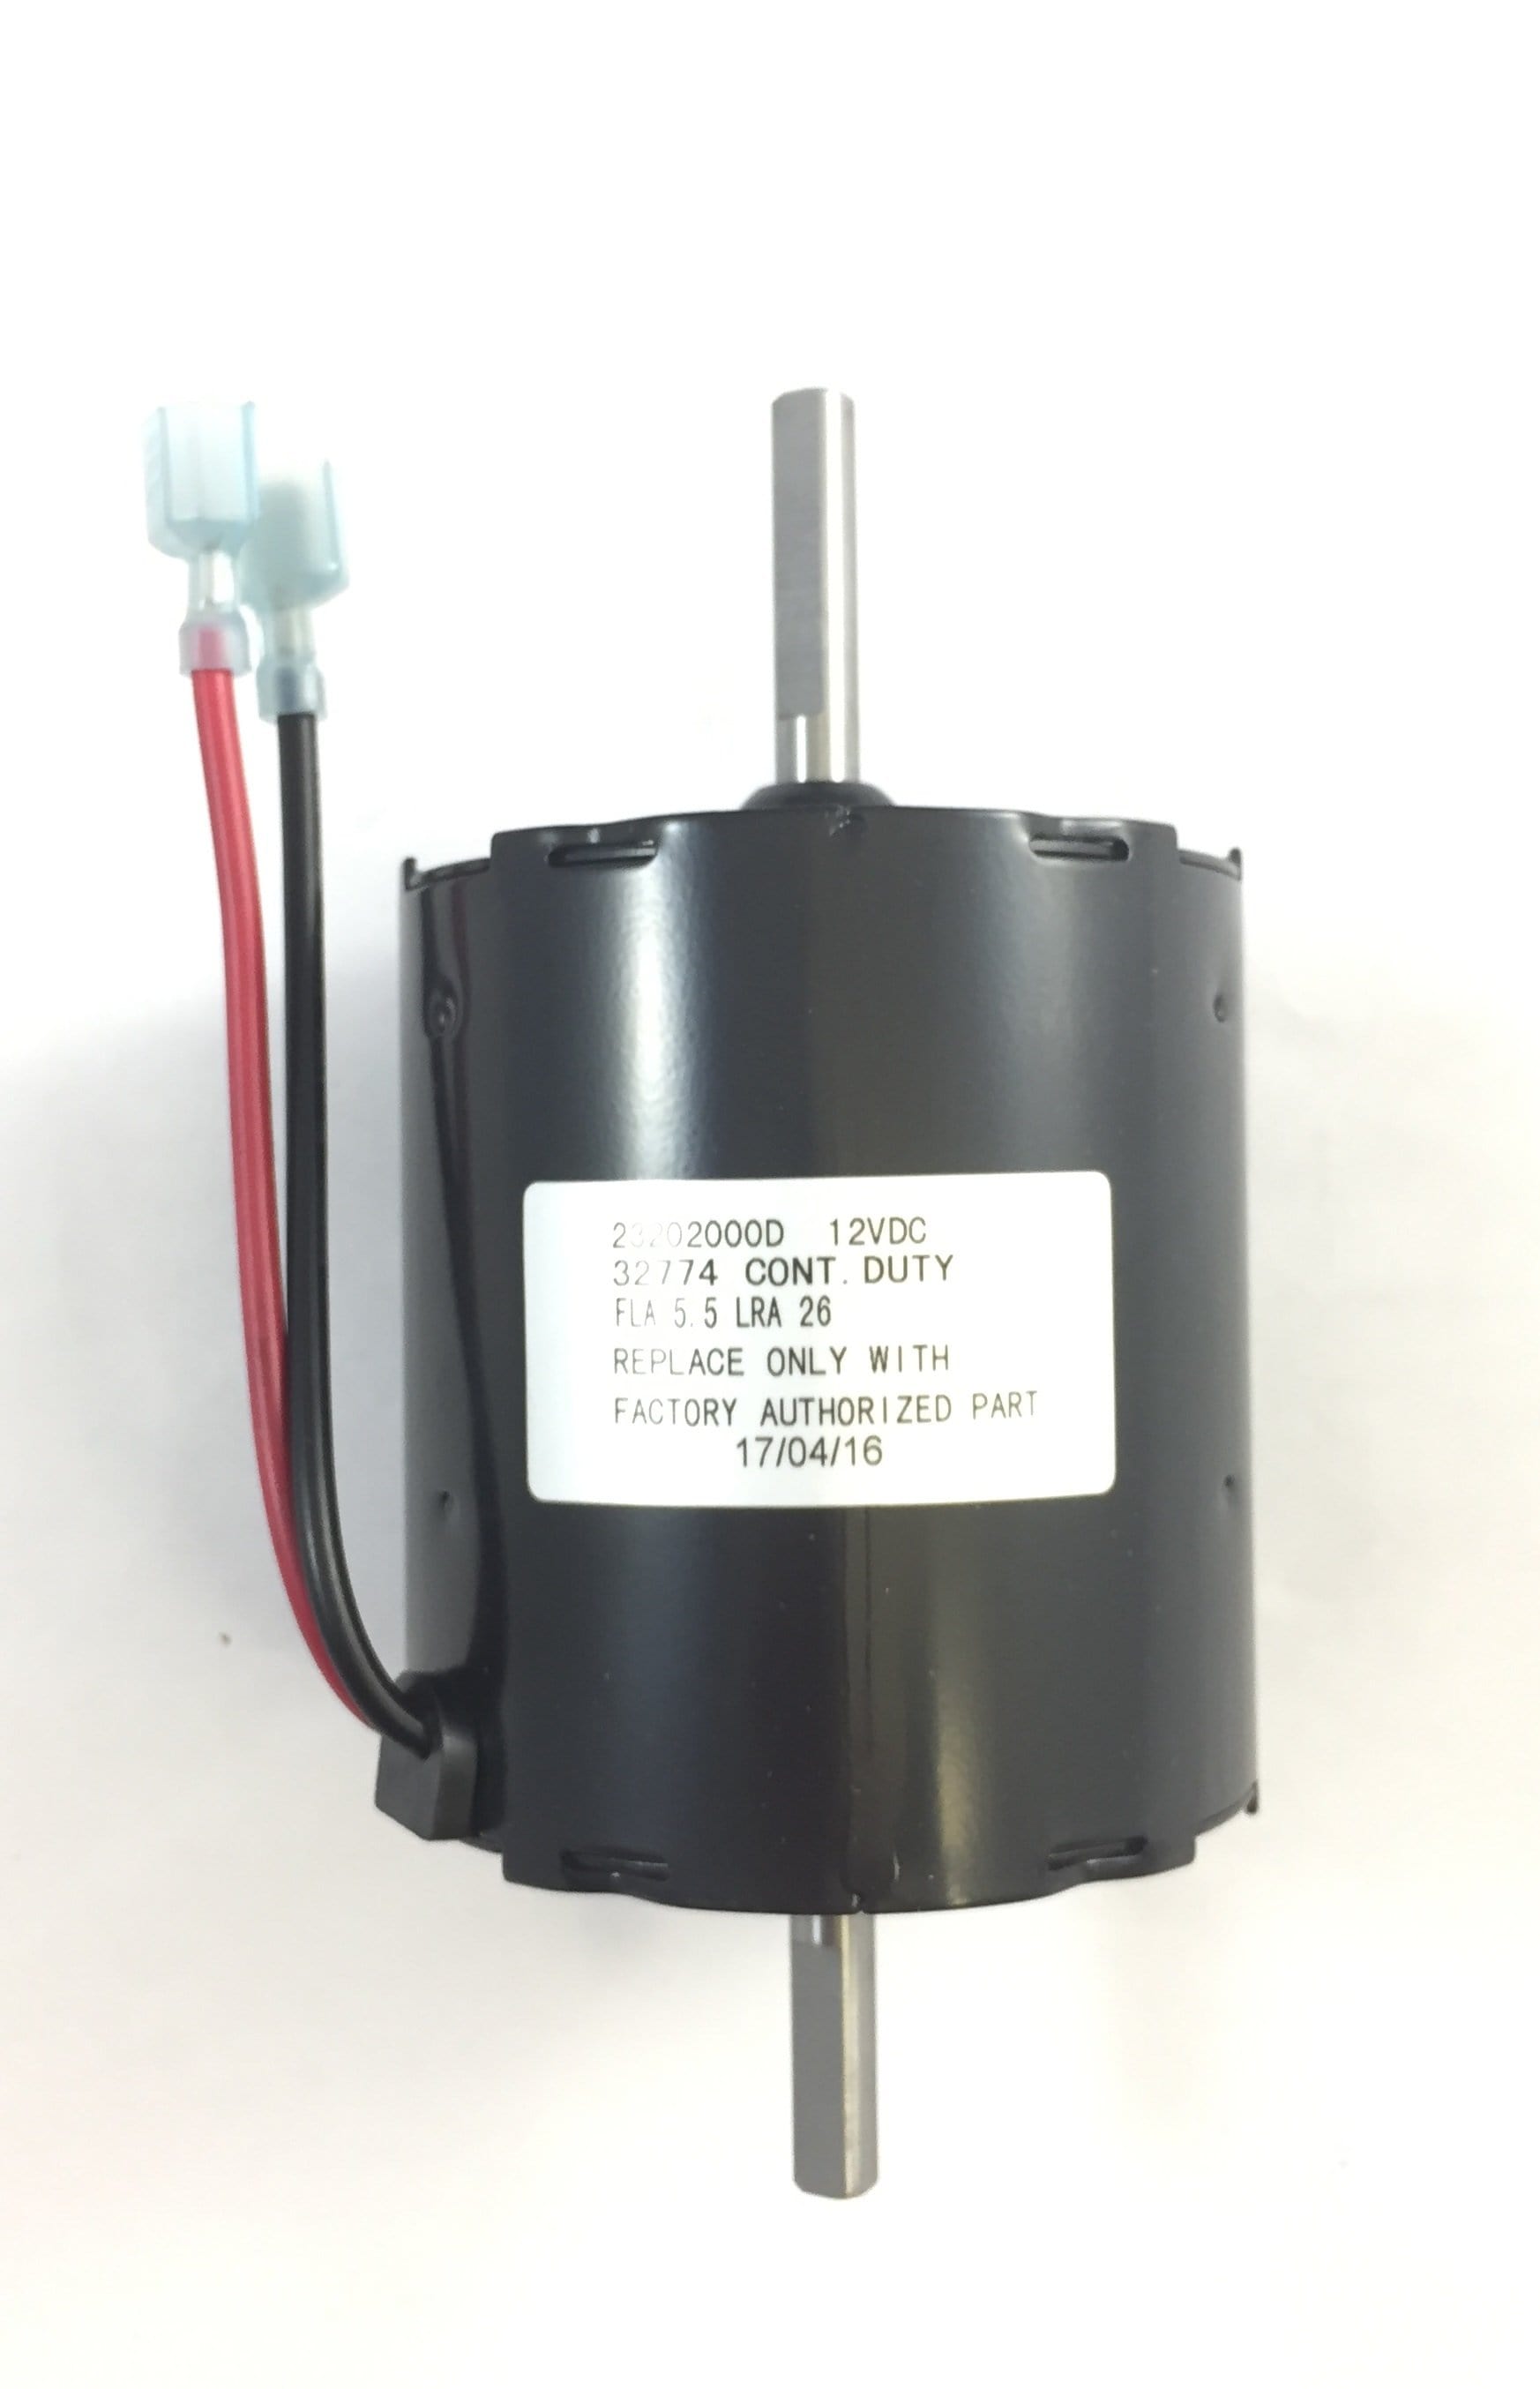 Atwood 32774 (PF23175Q) Motor For Hydro Flame Furnaces